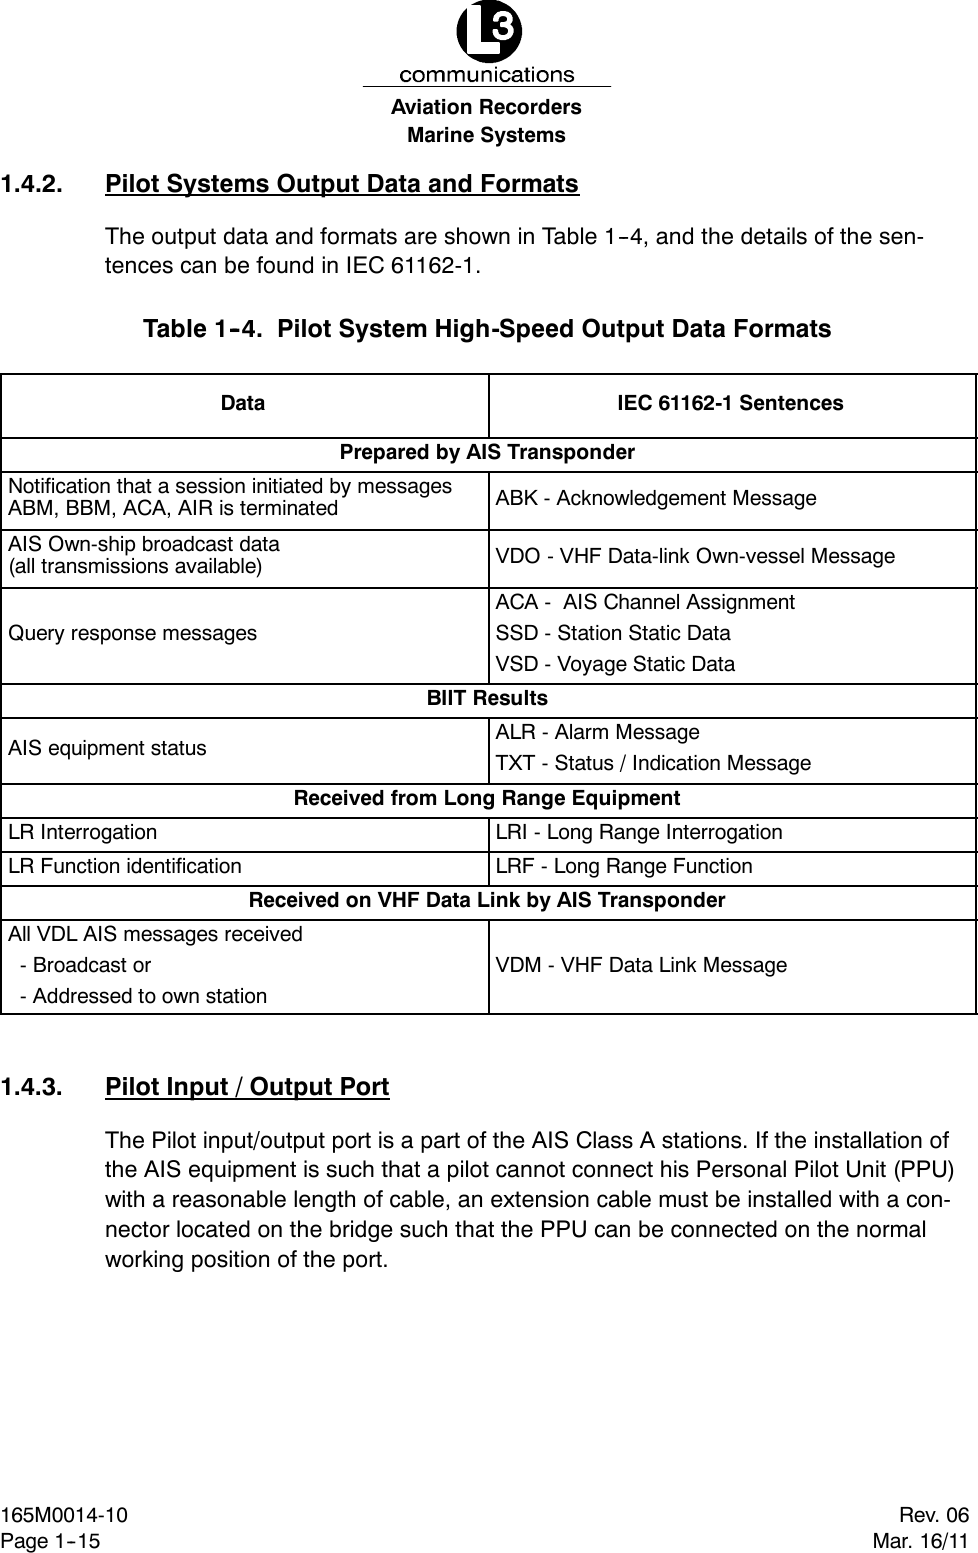 Marine SystemsAviation RecordersRev. 06Mar. 16/11165M0014-10Page 1--151.4.2. Pilot Systems Output Data and FormatsThe output data and formats are shown in Table 1--4, and the details of the sen-tences can be found in IEC 61162-1.Table 1--4. Pilot System High-Speed Output Data FormatsData IEC 61162-1 SentencesPrepared by AIS TransponderNotification that a session initiated by messagesABM, BBM, ACA, AIR is terminated ABK - Acknowledgement MessageAIS Own-ship broadcast data(all transmissions available) VDO - VHF Data-link Own-vessel MessageQuery response messagesACA - AIS Channel AssignmentSSD - Station Static DataVSD - Voyage Static DataBIIT ResultsAIS equipment status ALR - Alarm MessageTXT - Status / Indication MessageReceived from Long Range EquipmentLR Interrogation LRI - Long Range InterrogationLR Function identification LRF - Long Range FunctionReceived on VHF Data Link by AIS TransponderAll VDL AIS messages received- Broadcast or- Addressed to own stationVDM - VHF Data Link Message1.4.3. Pilot Input / Output PortThe Pilot input/output port is a part of the AIS Class A stations. If the installation ofthe AIS equipment is such that a pilot cannot connect his Personal Pilot Unit (PPU)with a reasonable length of cable, an extension cable must be installed with a con-nector located on the bridge such that the PPU can be connected on the normalworking position of the port.